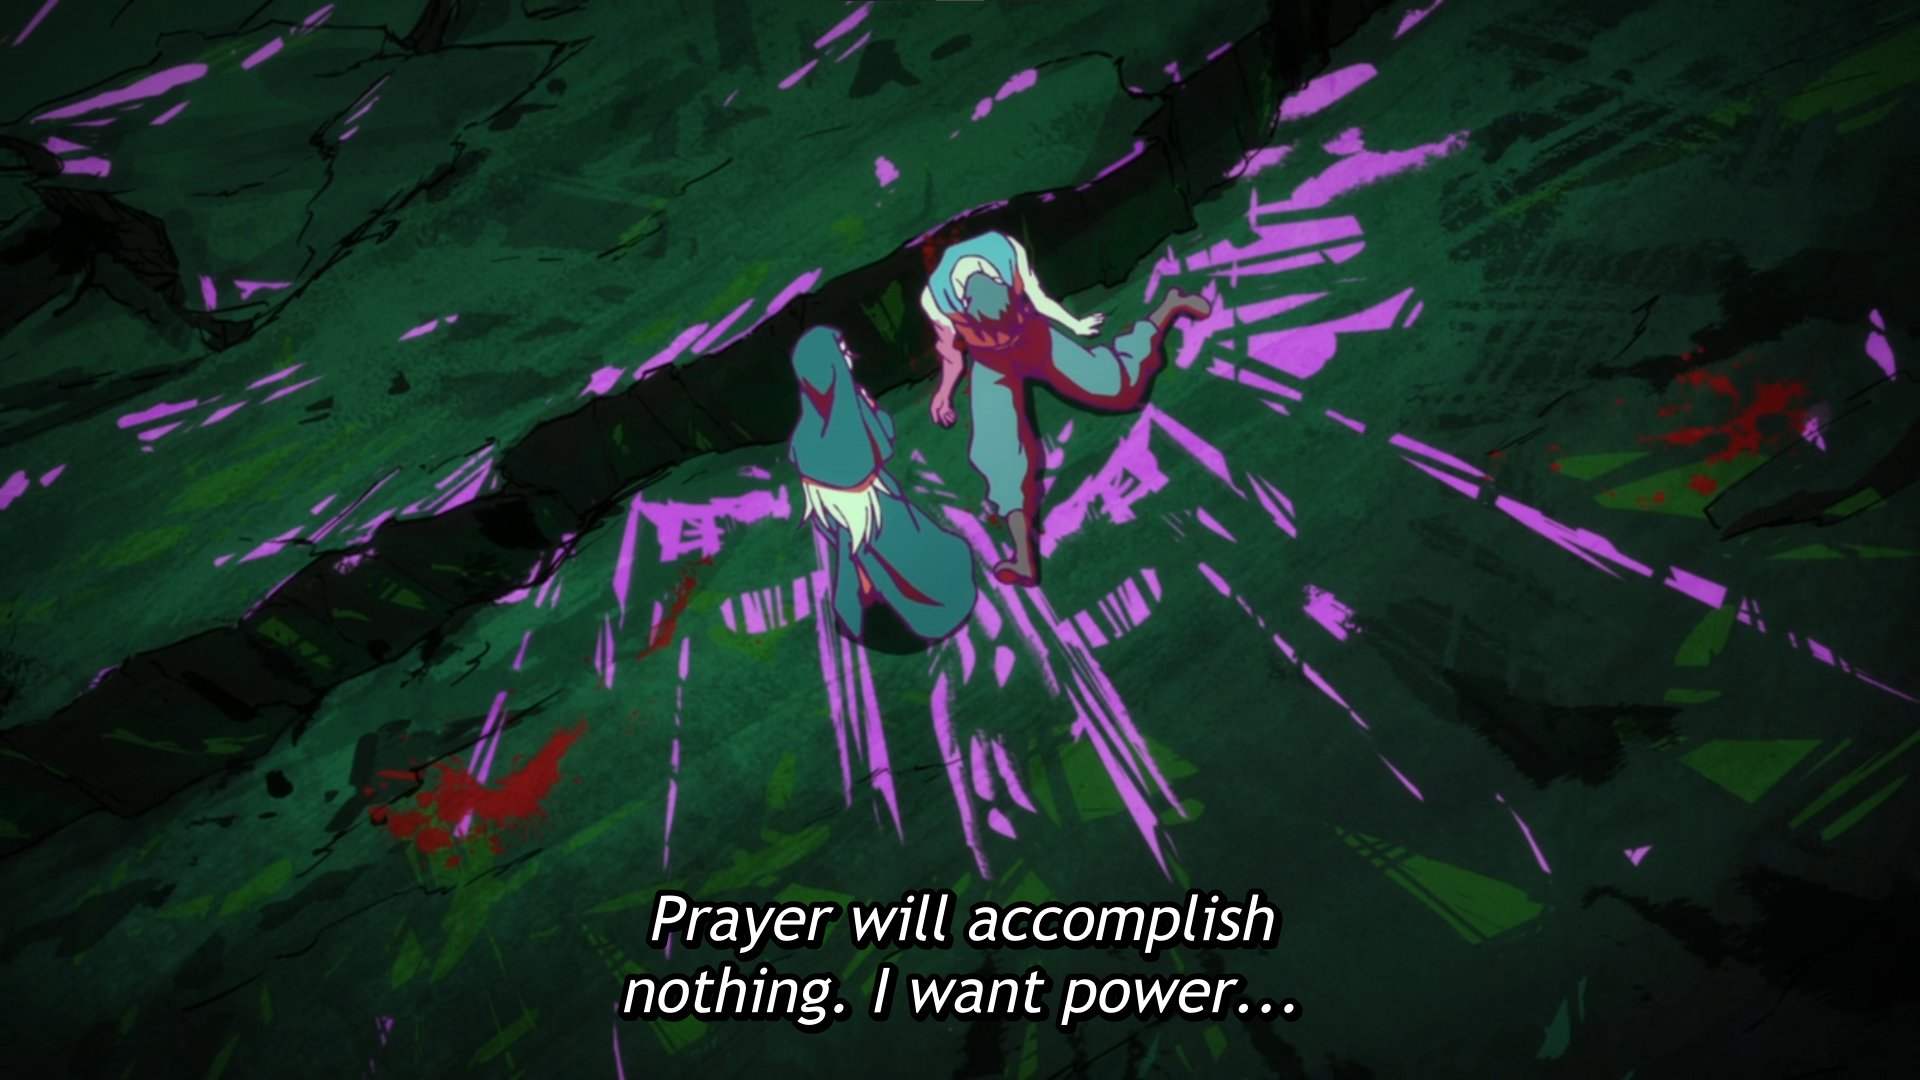 A nun hovering over a bloody corpse. Subtitle reads: "Prayer will accomplish nothing. I want power..."